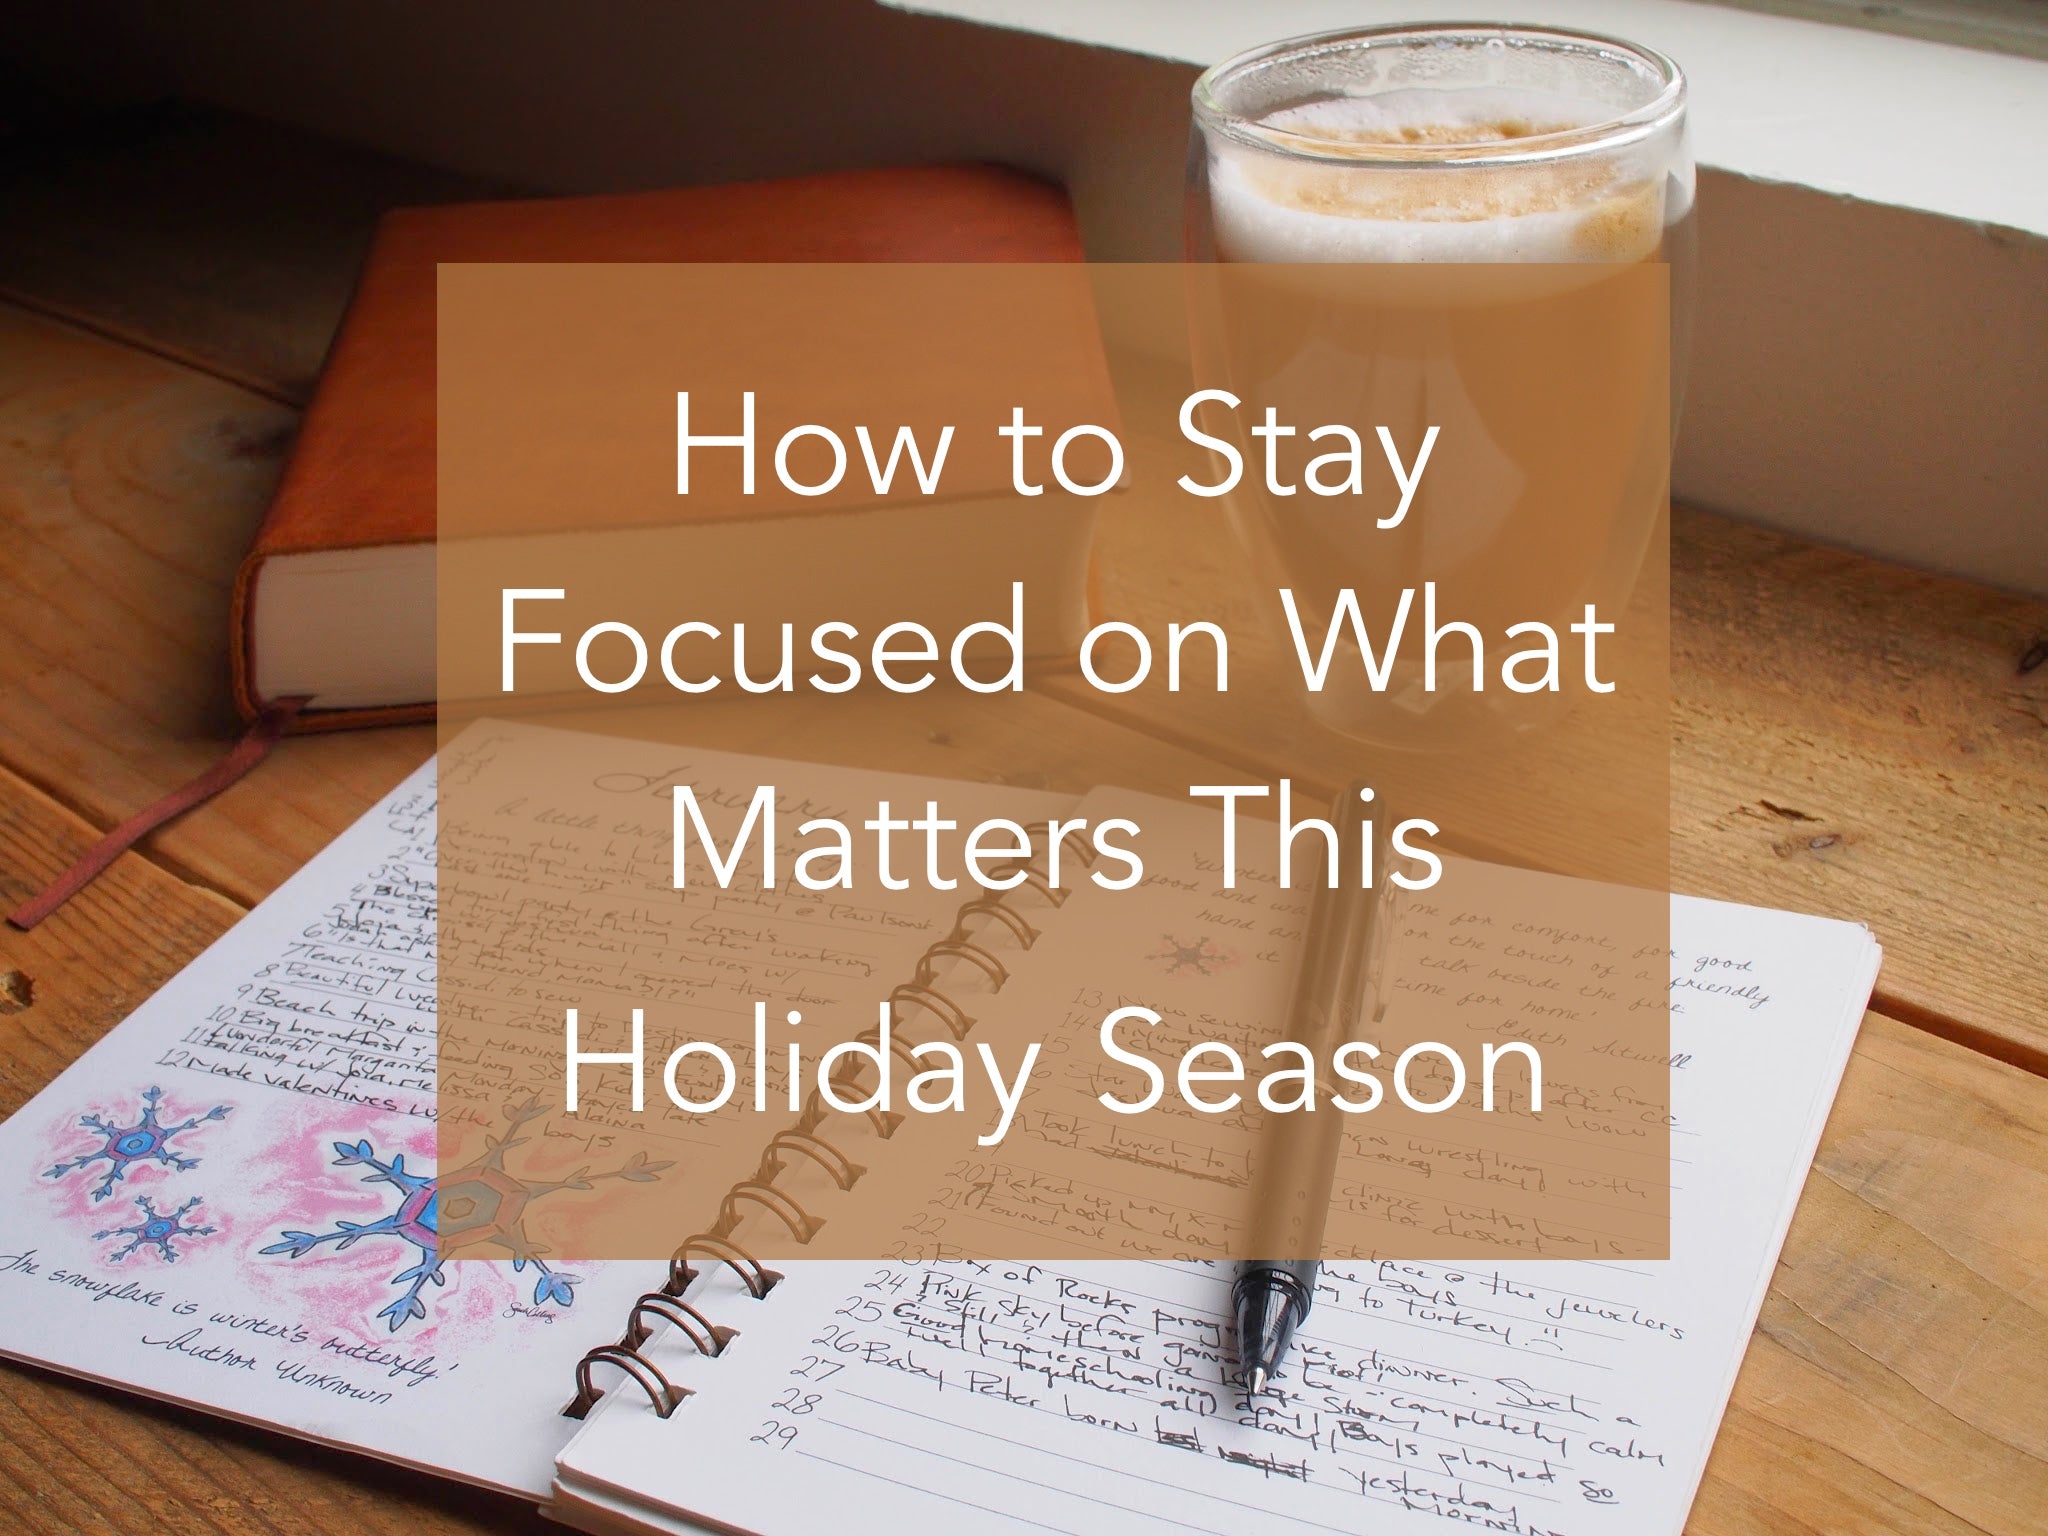 How to Stay Focused on What Matters This Holiday Season